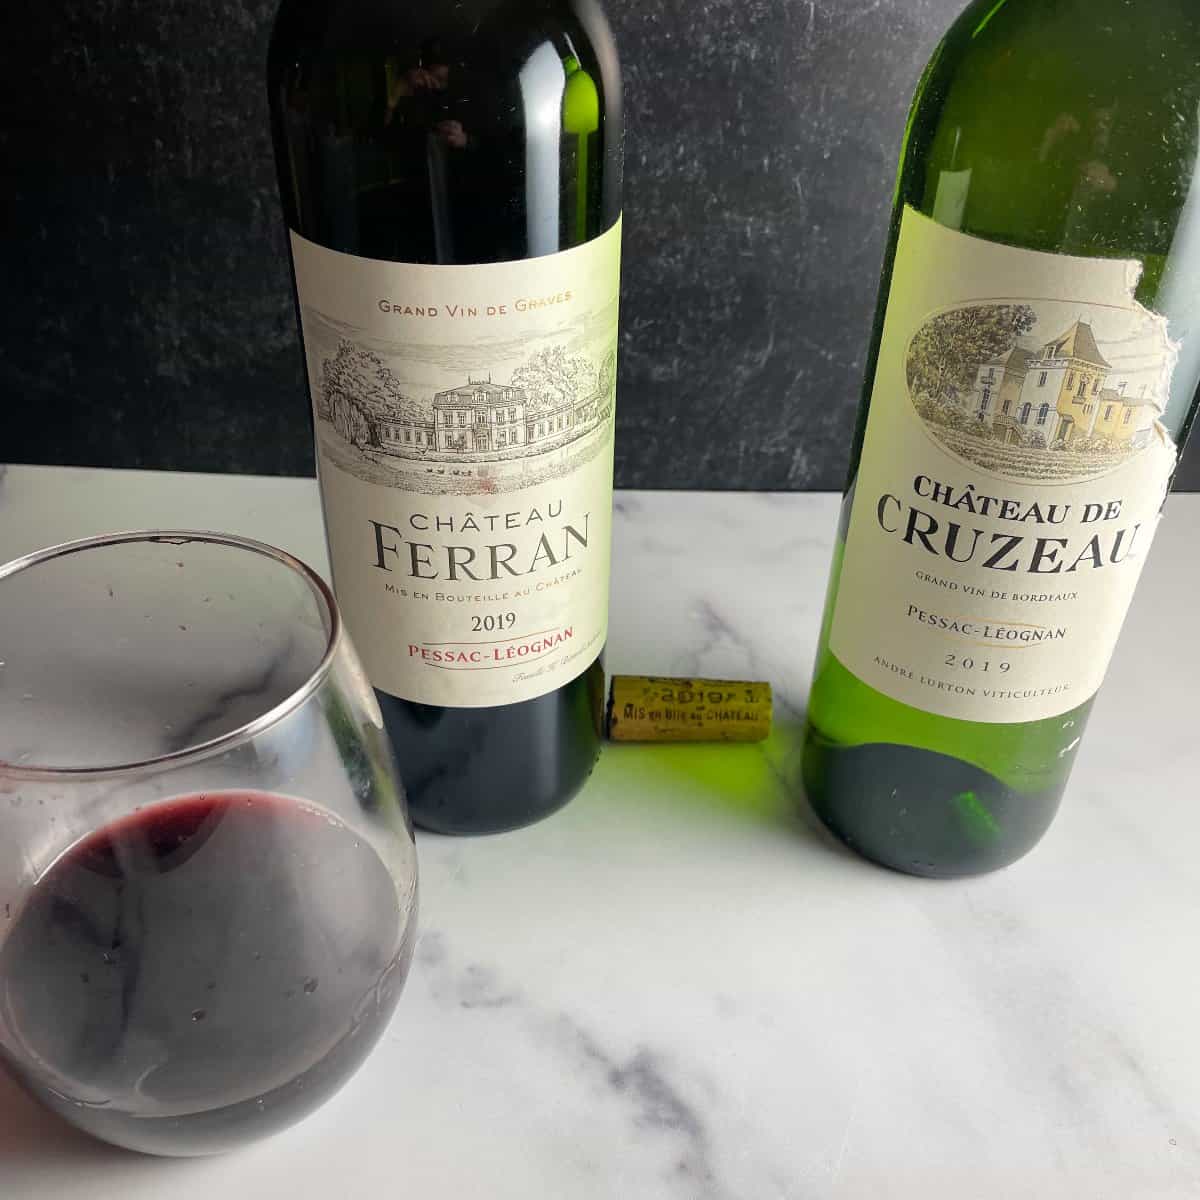 Two bottles of Pessac-Léognan wine, with a red on the left and a white on the right, and a glass of red wine.